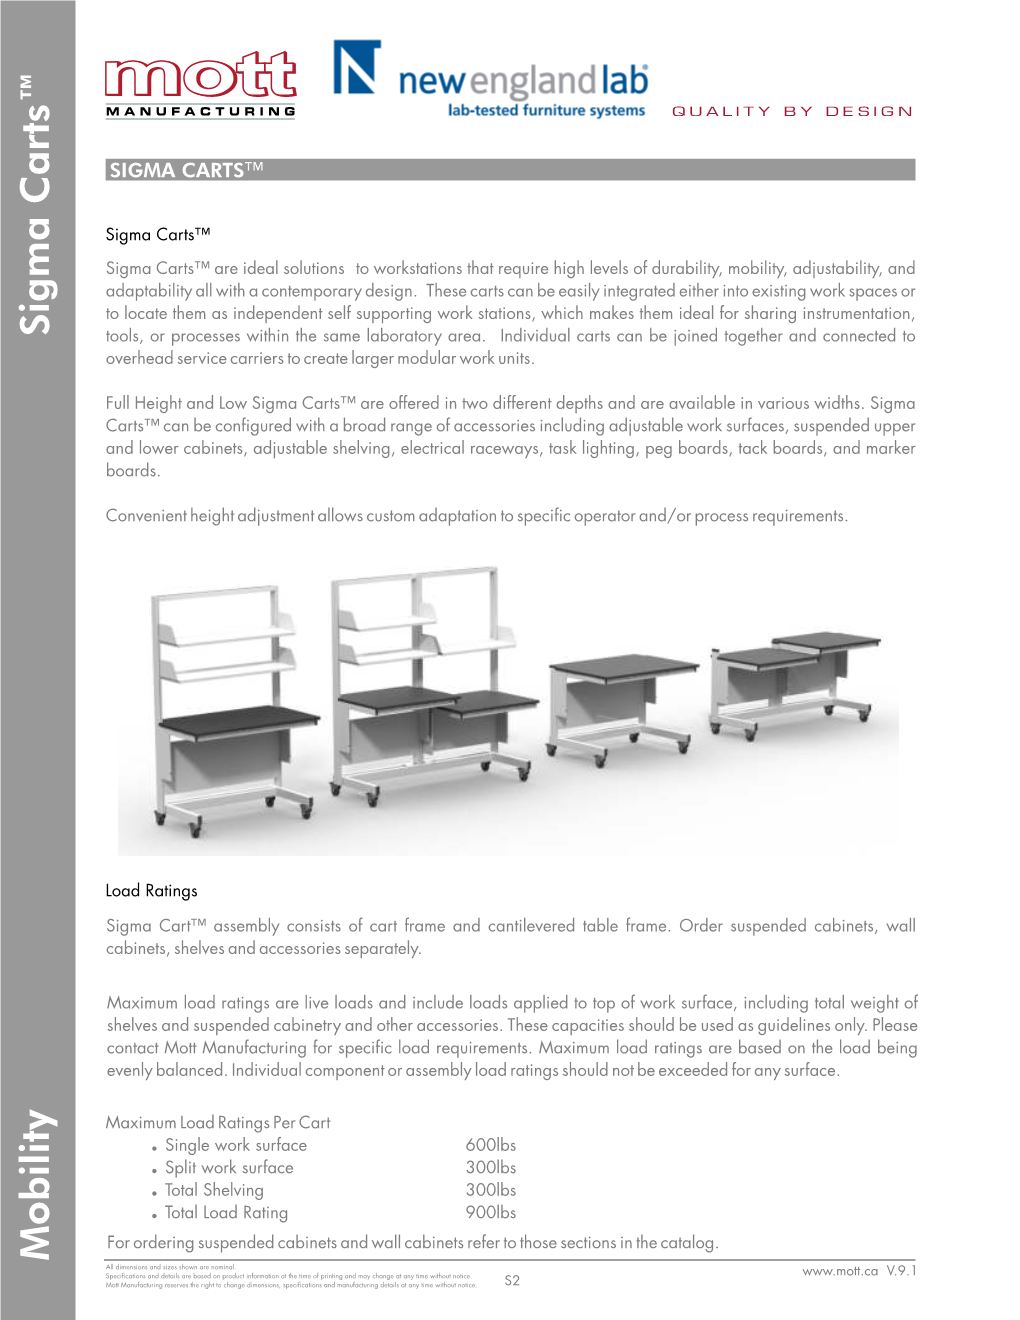 Mobility Sigma Carts Mobility Sigma Carts All Dimensions and Sizes Shown Are Nominal